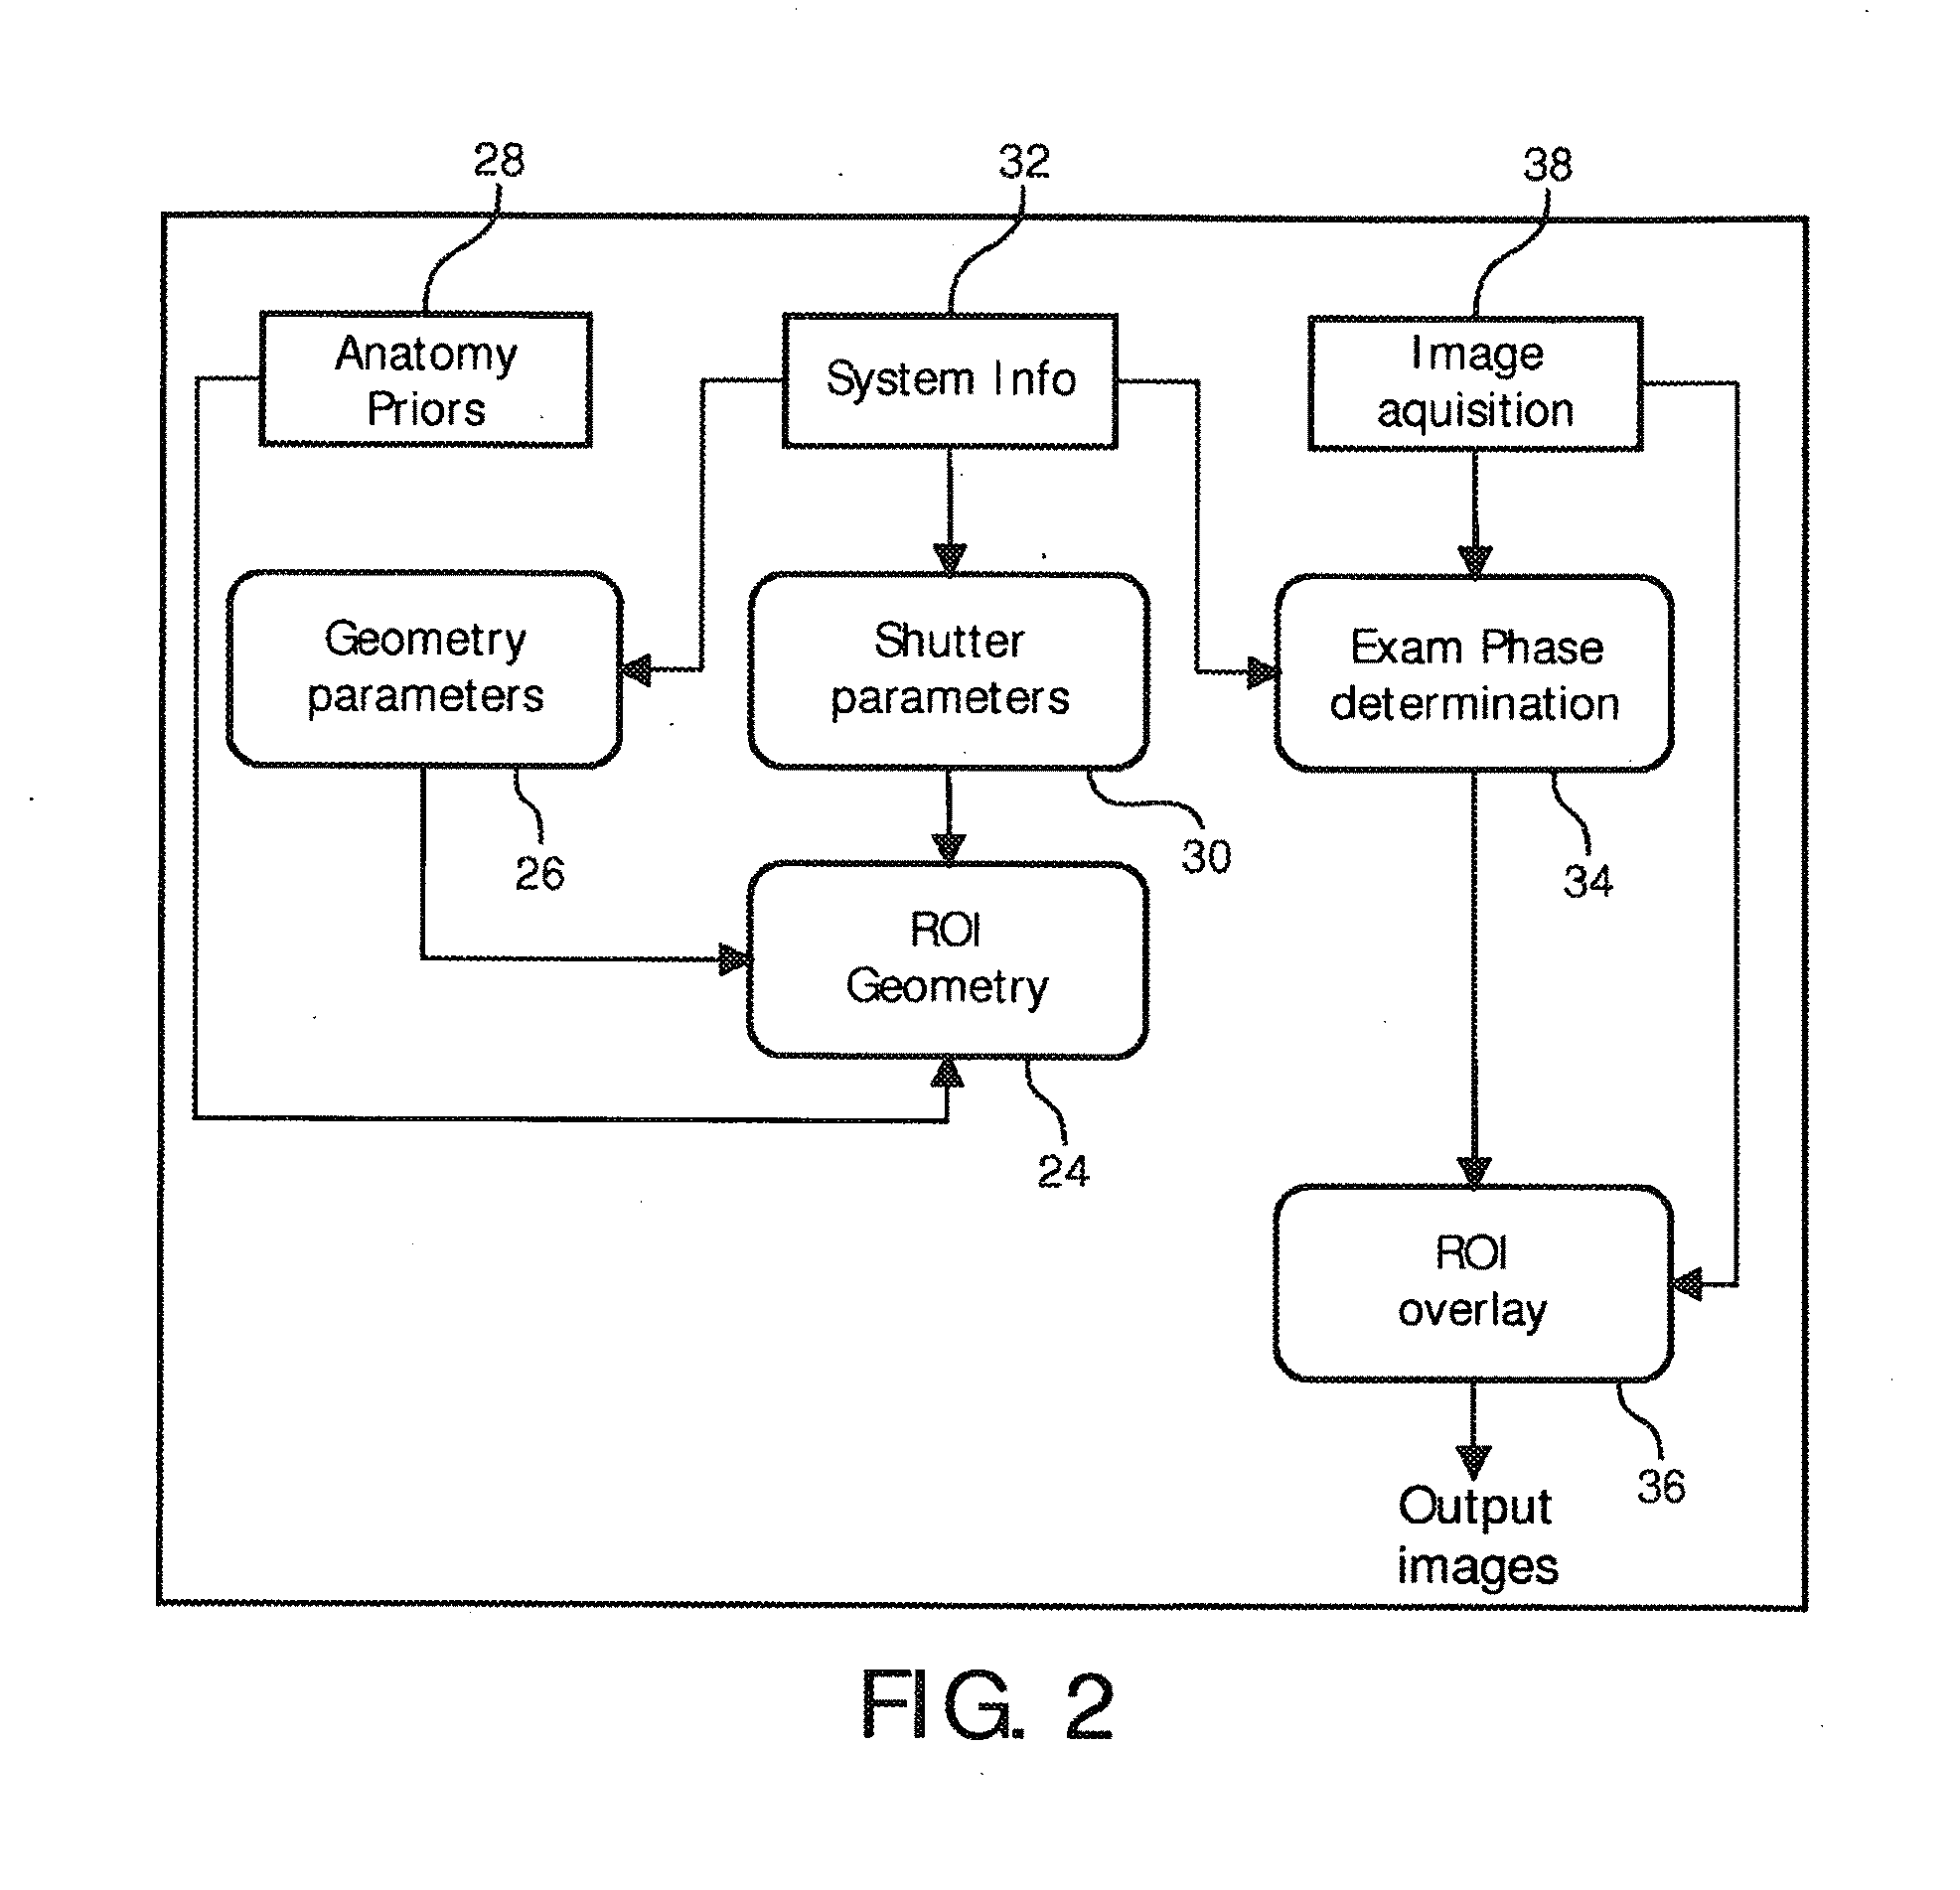 Medical viewing system for displaying a region of interest on medical images